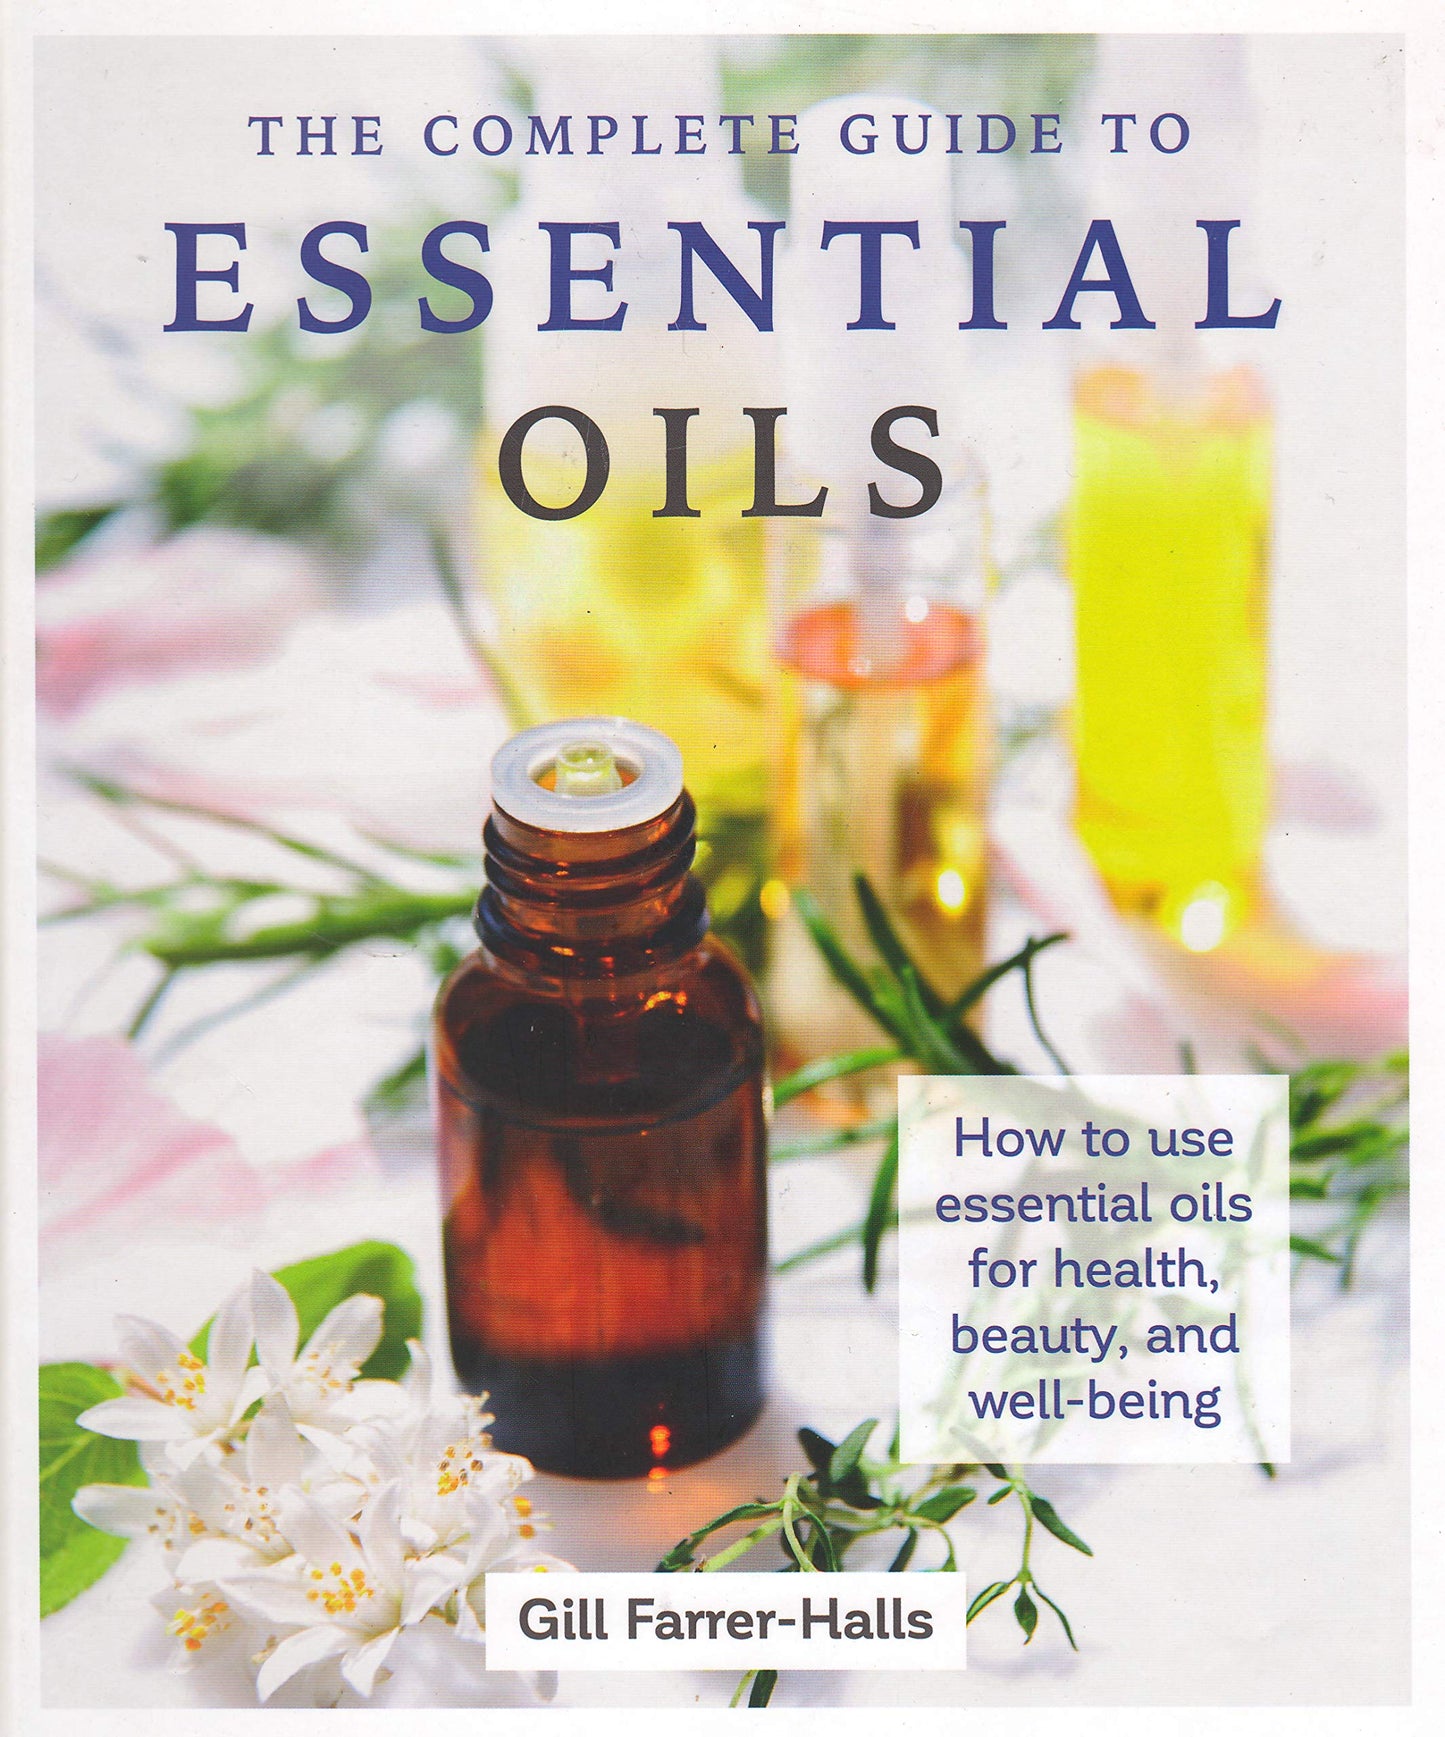 The Complete Guide to Essential Oils: How to use essential oils for health, beauty, and well-being